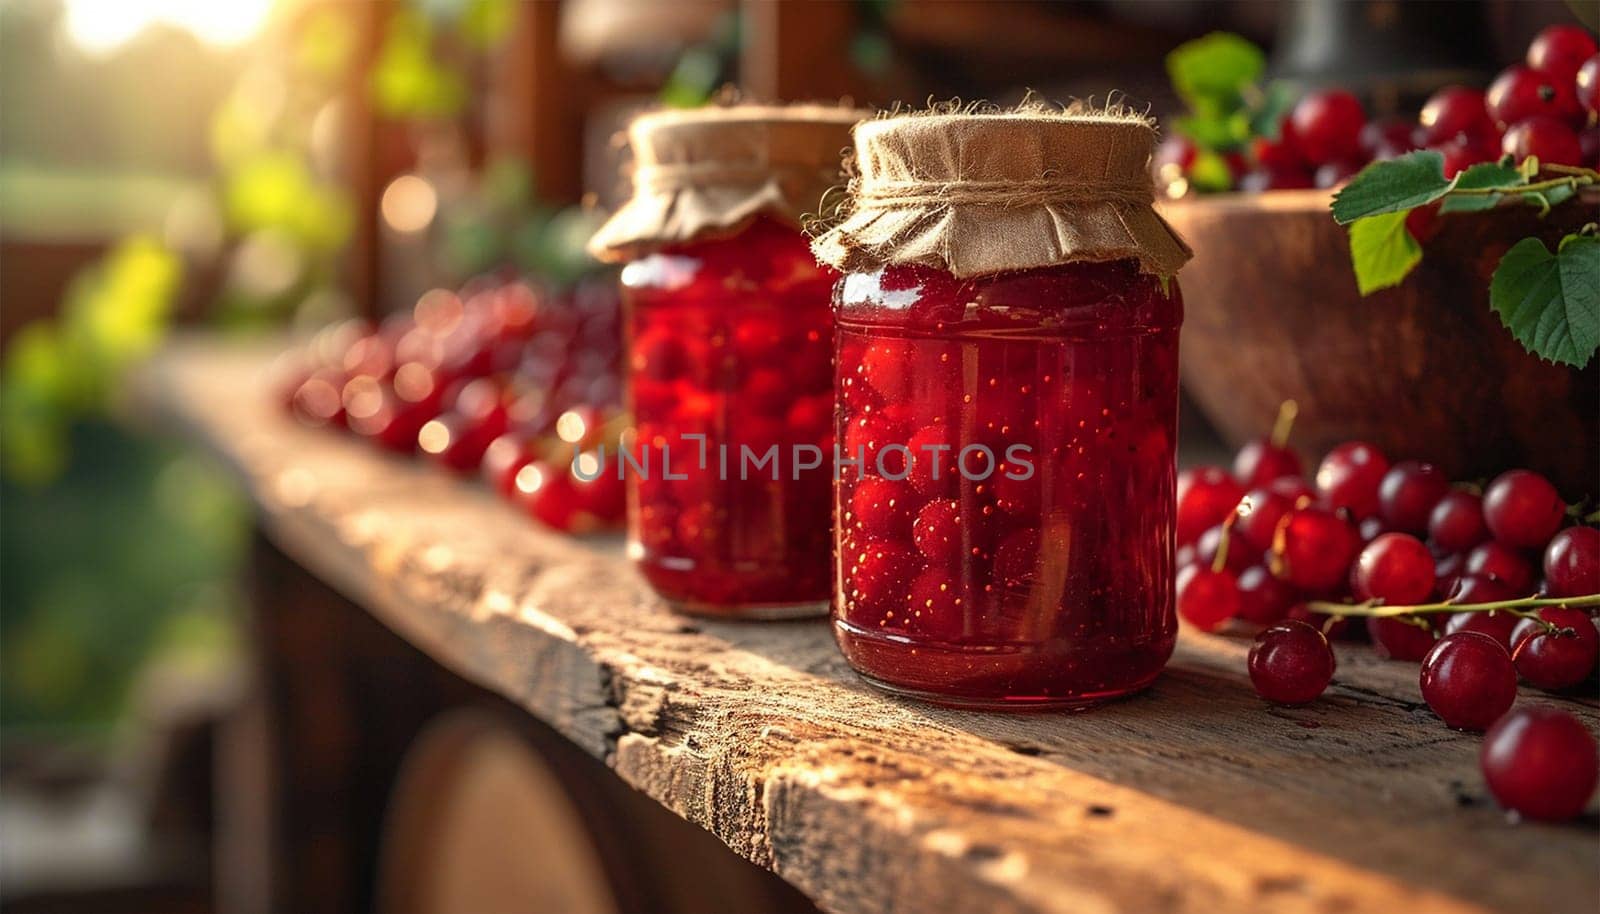 Raspberry jam with berry on light background. Homemade jam with raspberry. banner, menu, recipe place for text, top Various jams peach and strawberry on wooden table by Annebel146